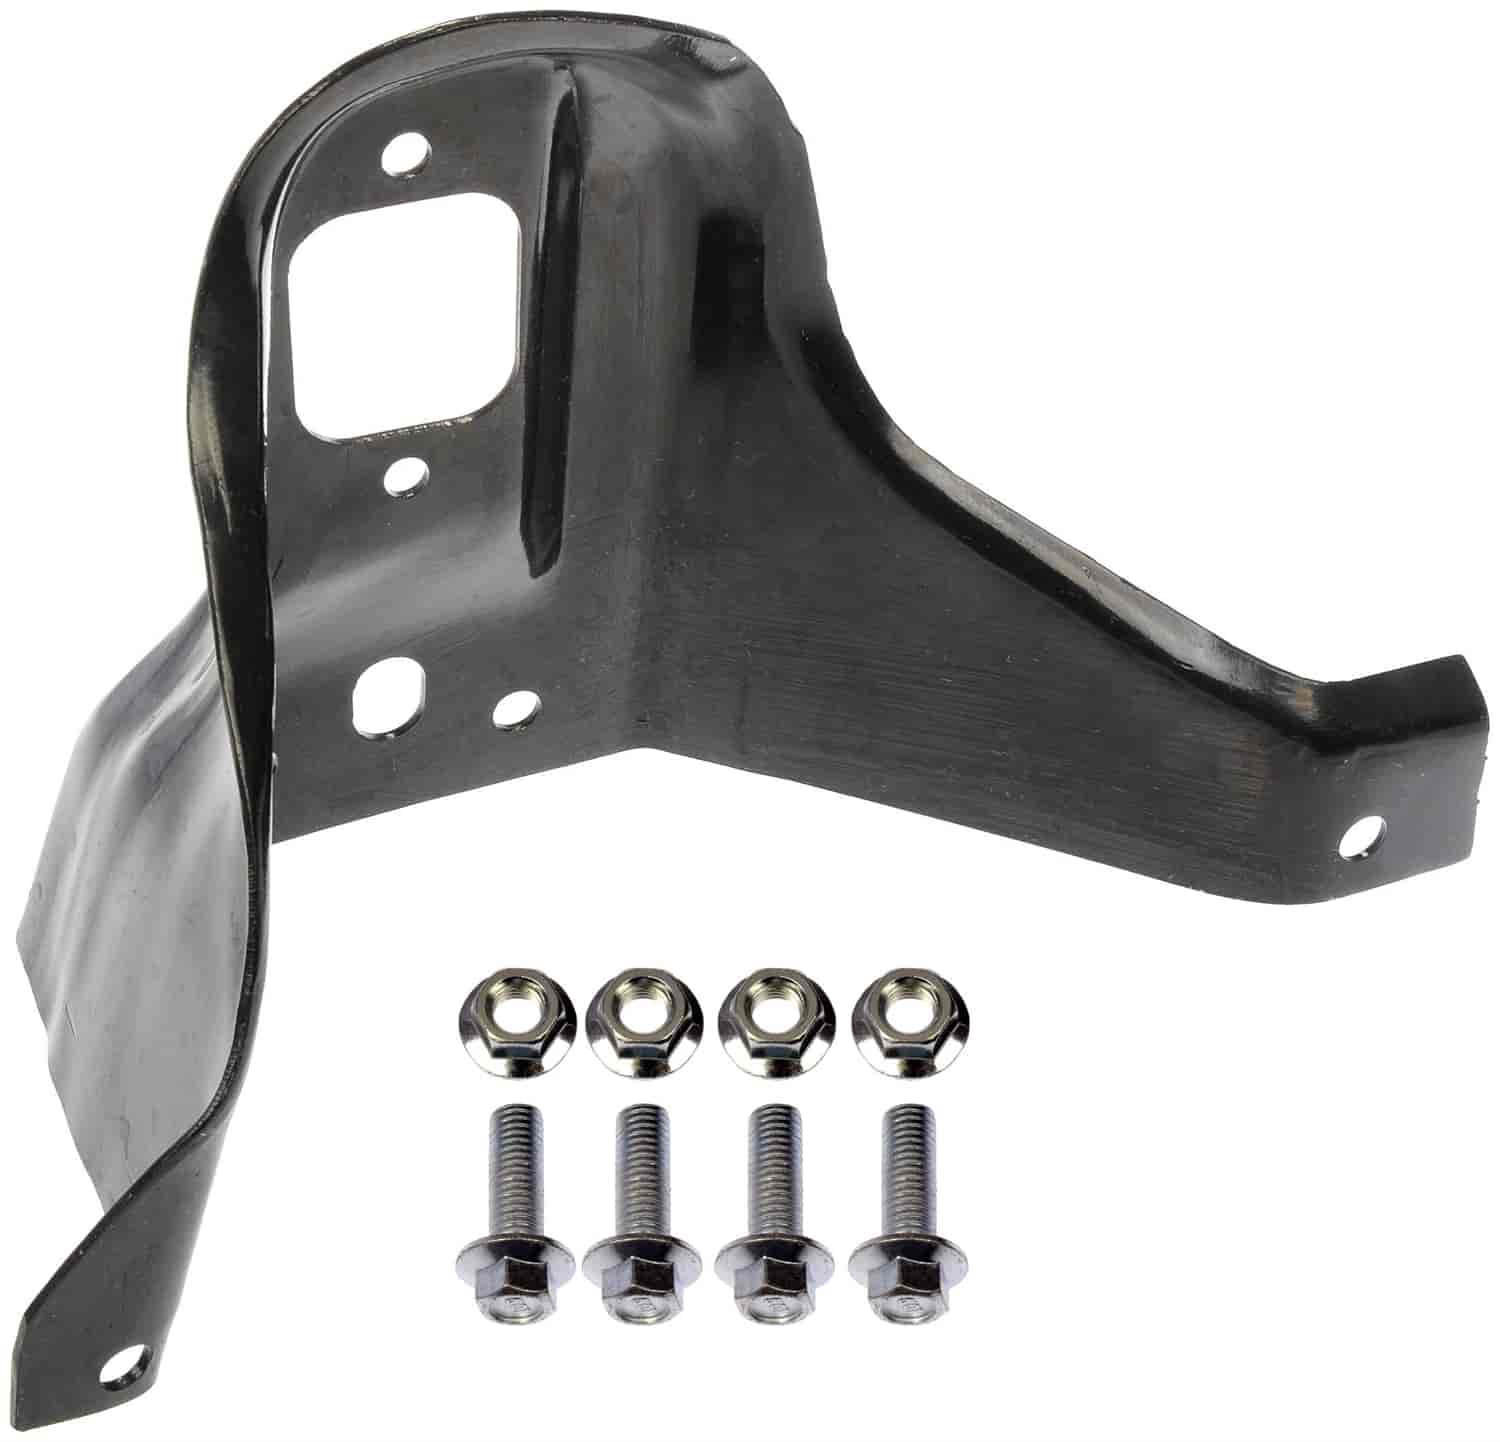 Right Rear Upper Position Shock Mount for 1988-2000